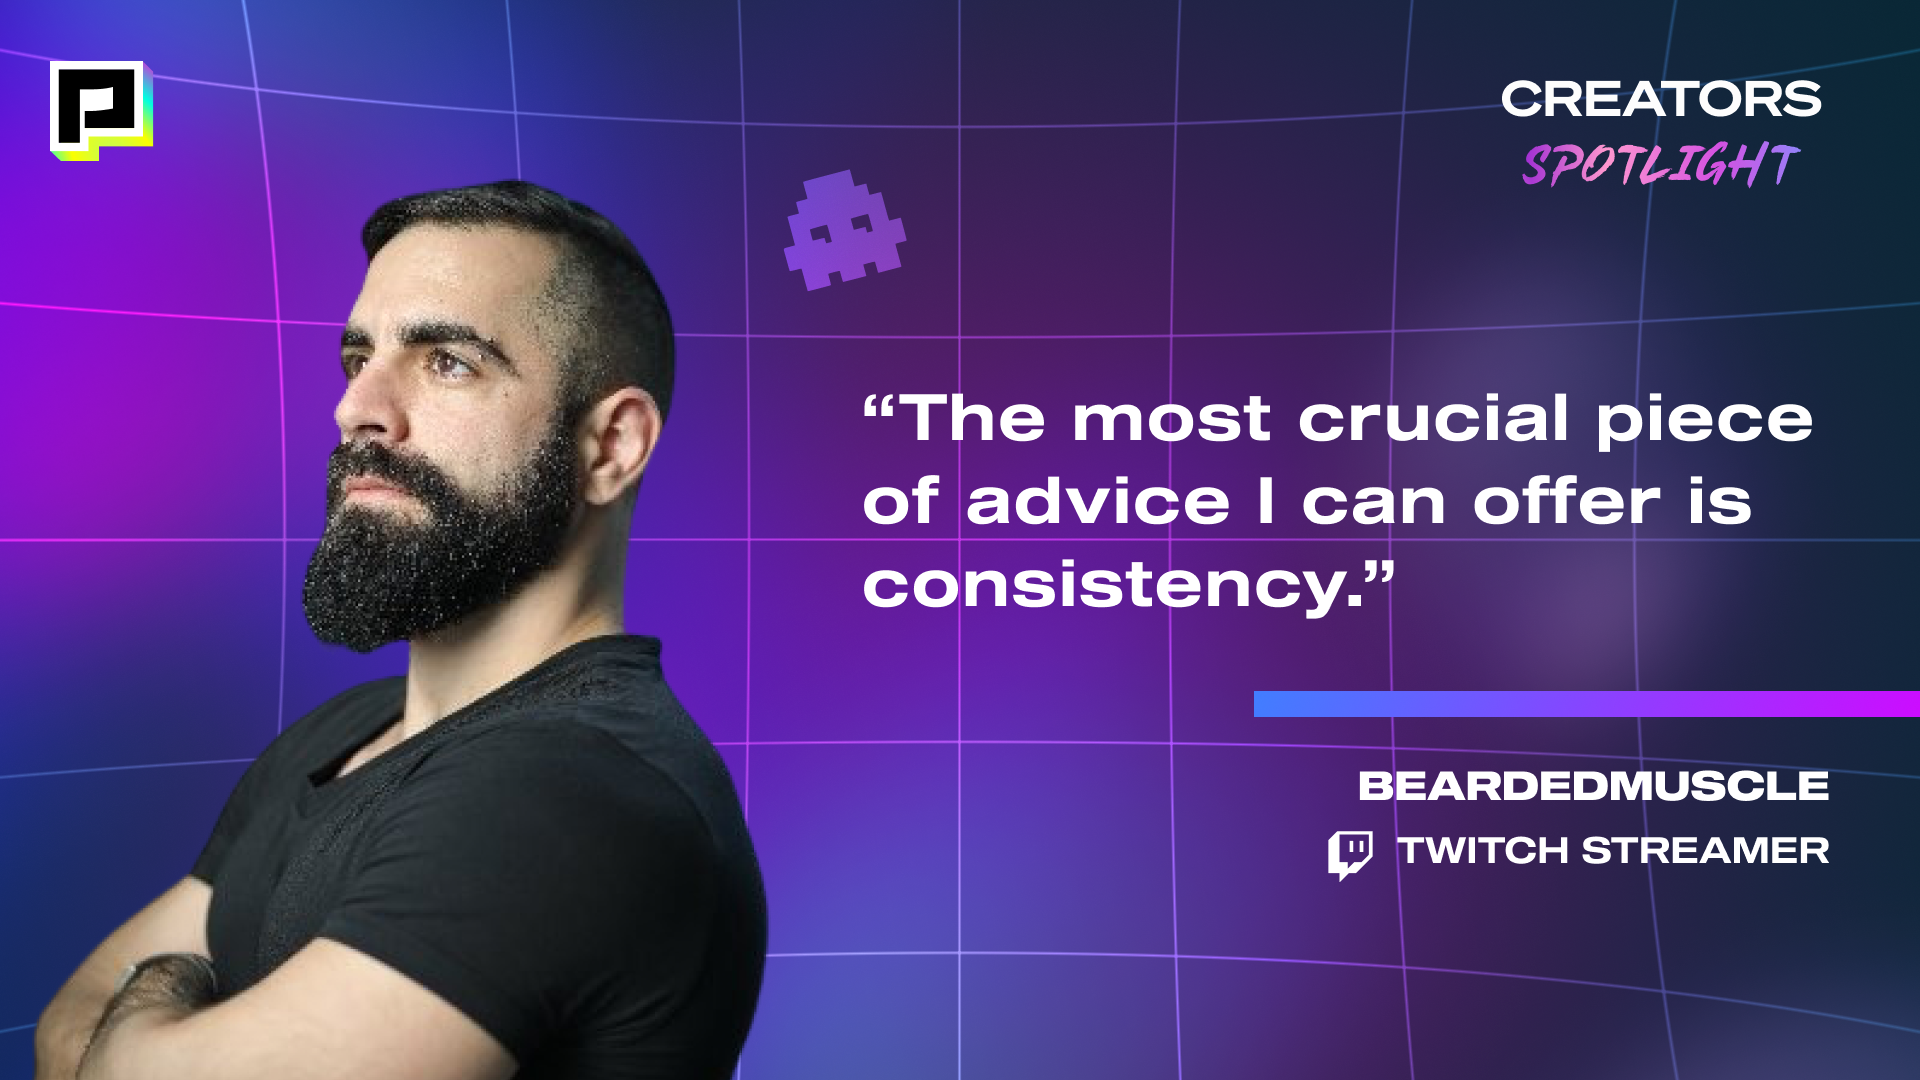 Image of Twitch Streamer, BEARDEDMUSCLE with his quote, "The most crucial piece of advice I can offer is consistency."